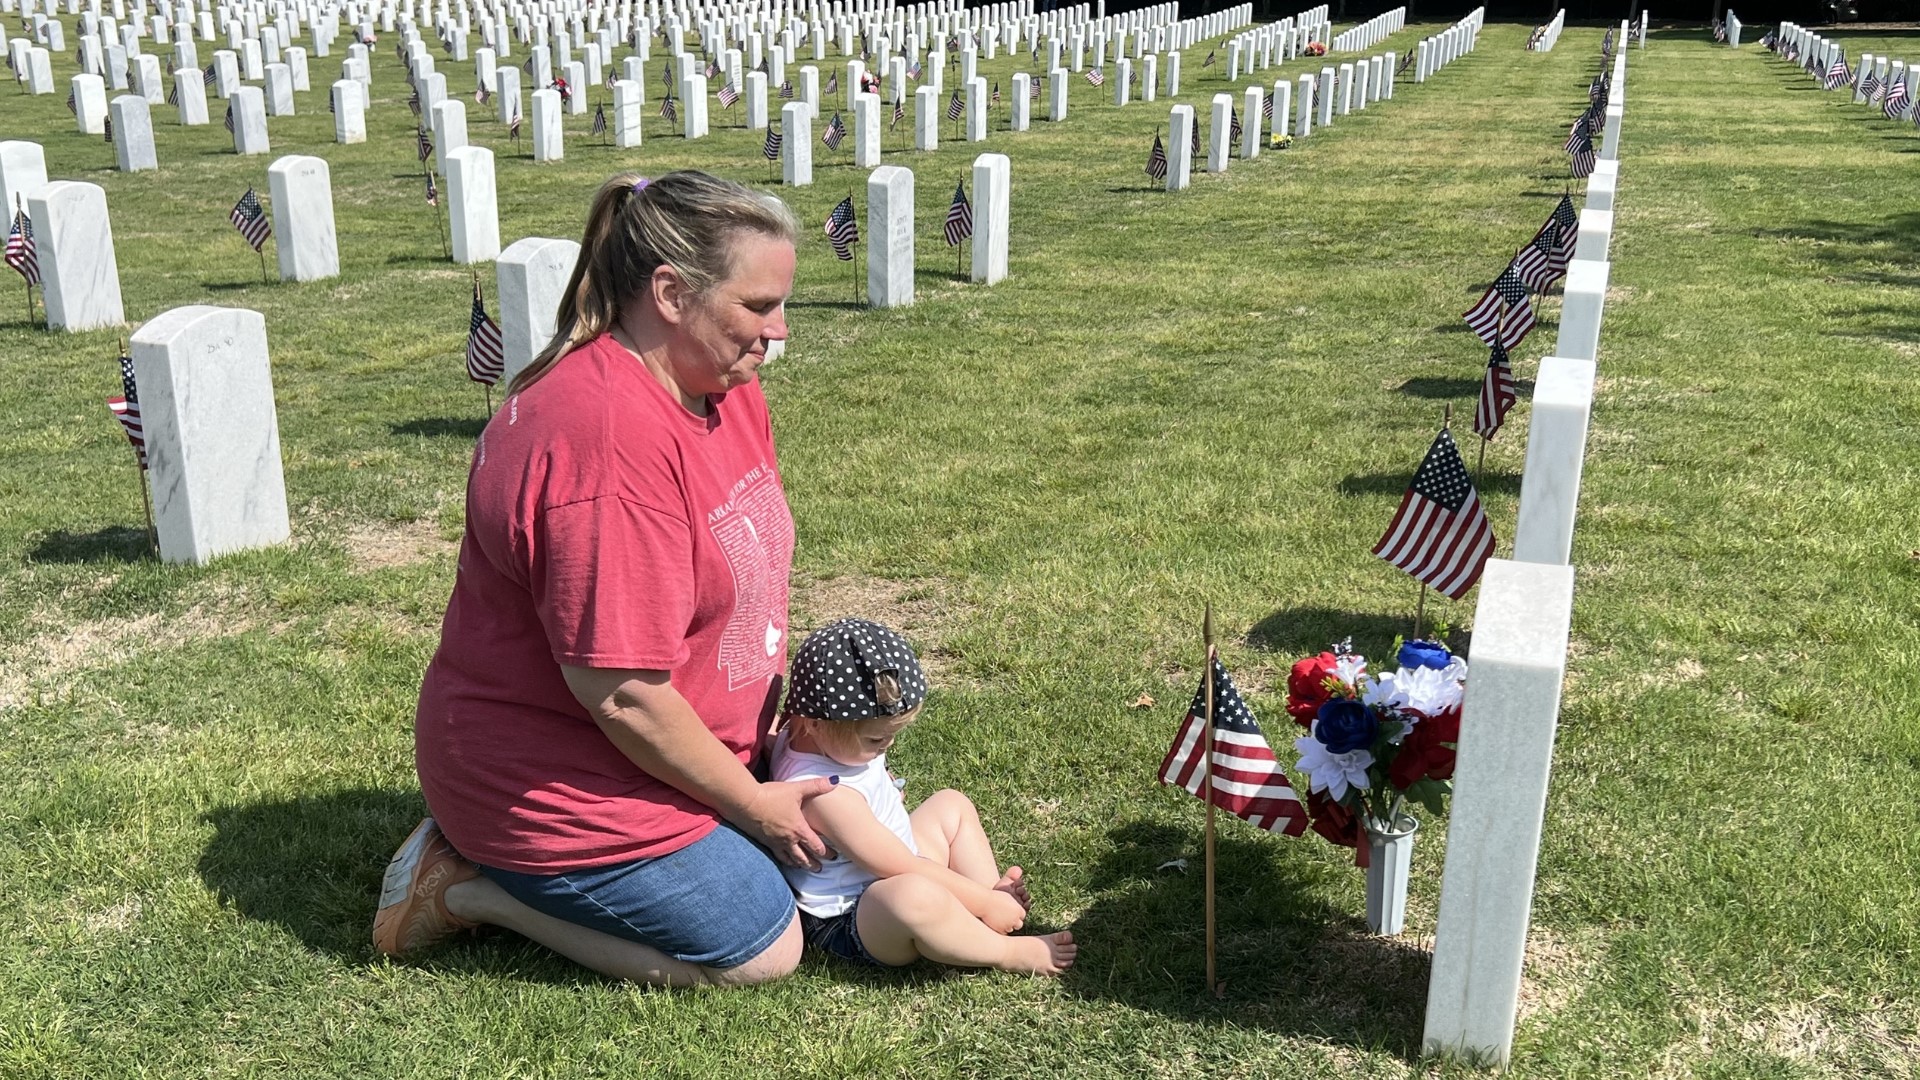 In preparation for Memorial Day, volunteers placed U.S .flags on headstones at Fayetteville National Cemetery on May 27, to honor fallen soldiers.